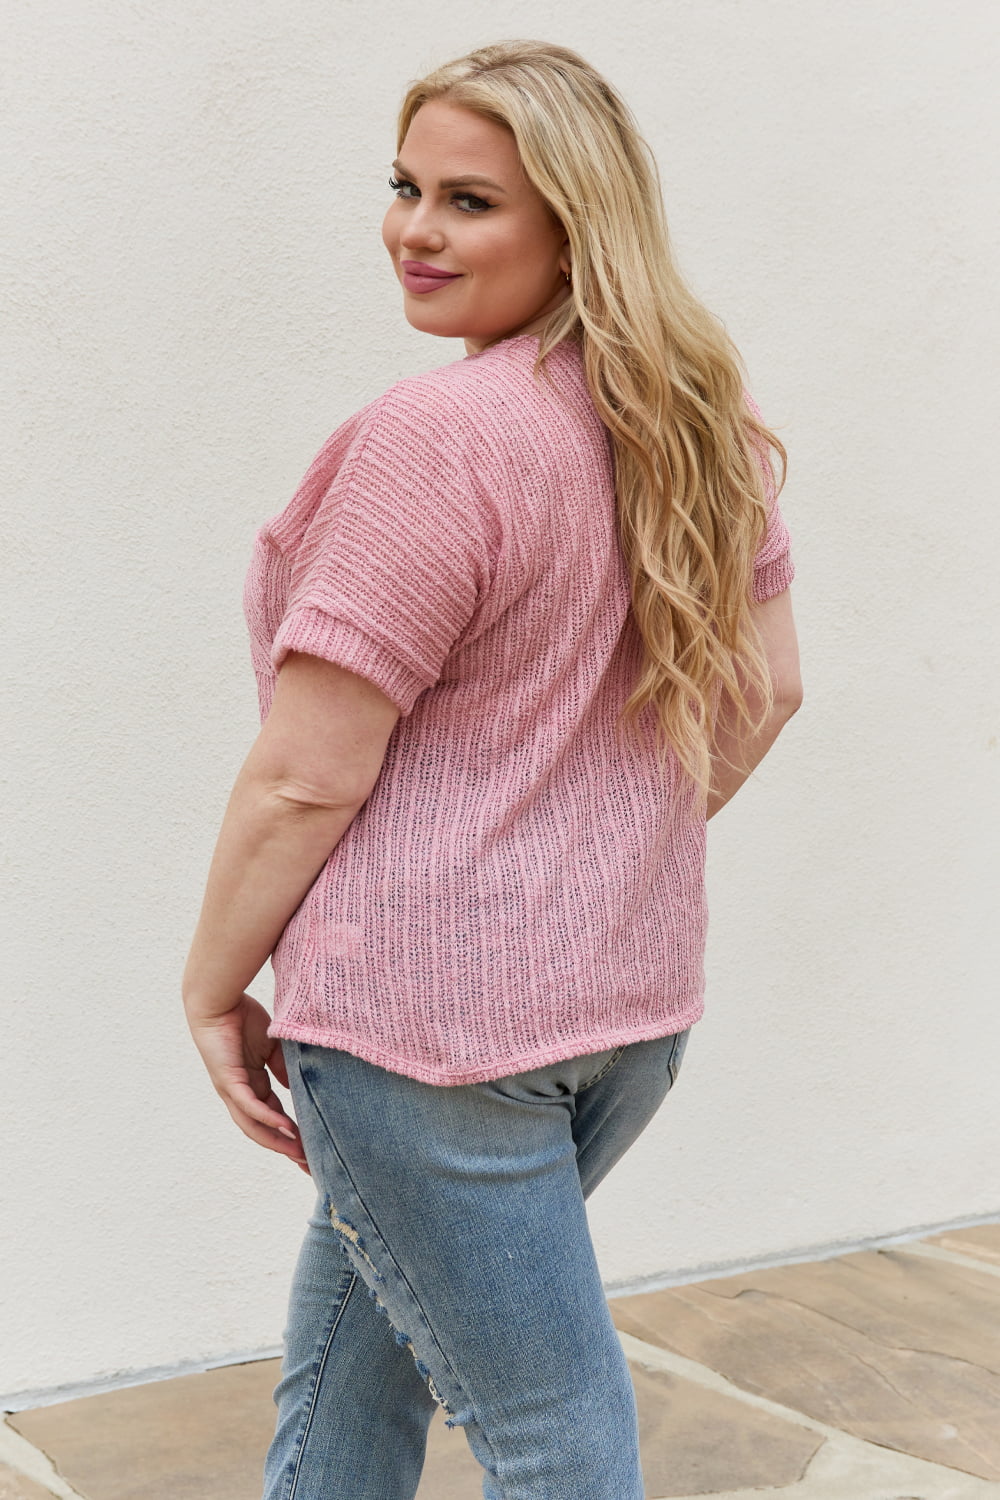 Chunky Knit Short Sleeve Top in Mauve - Camis & Tops - Shirts & Tops - 10 - 2024